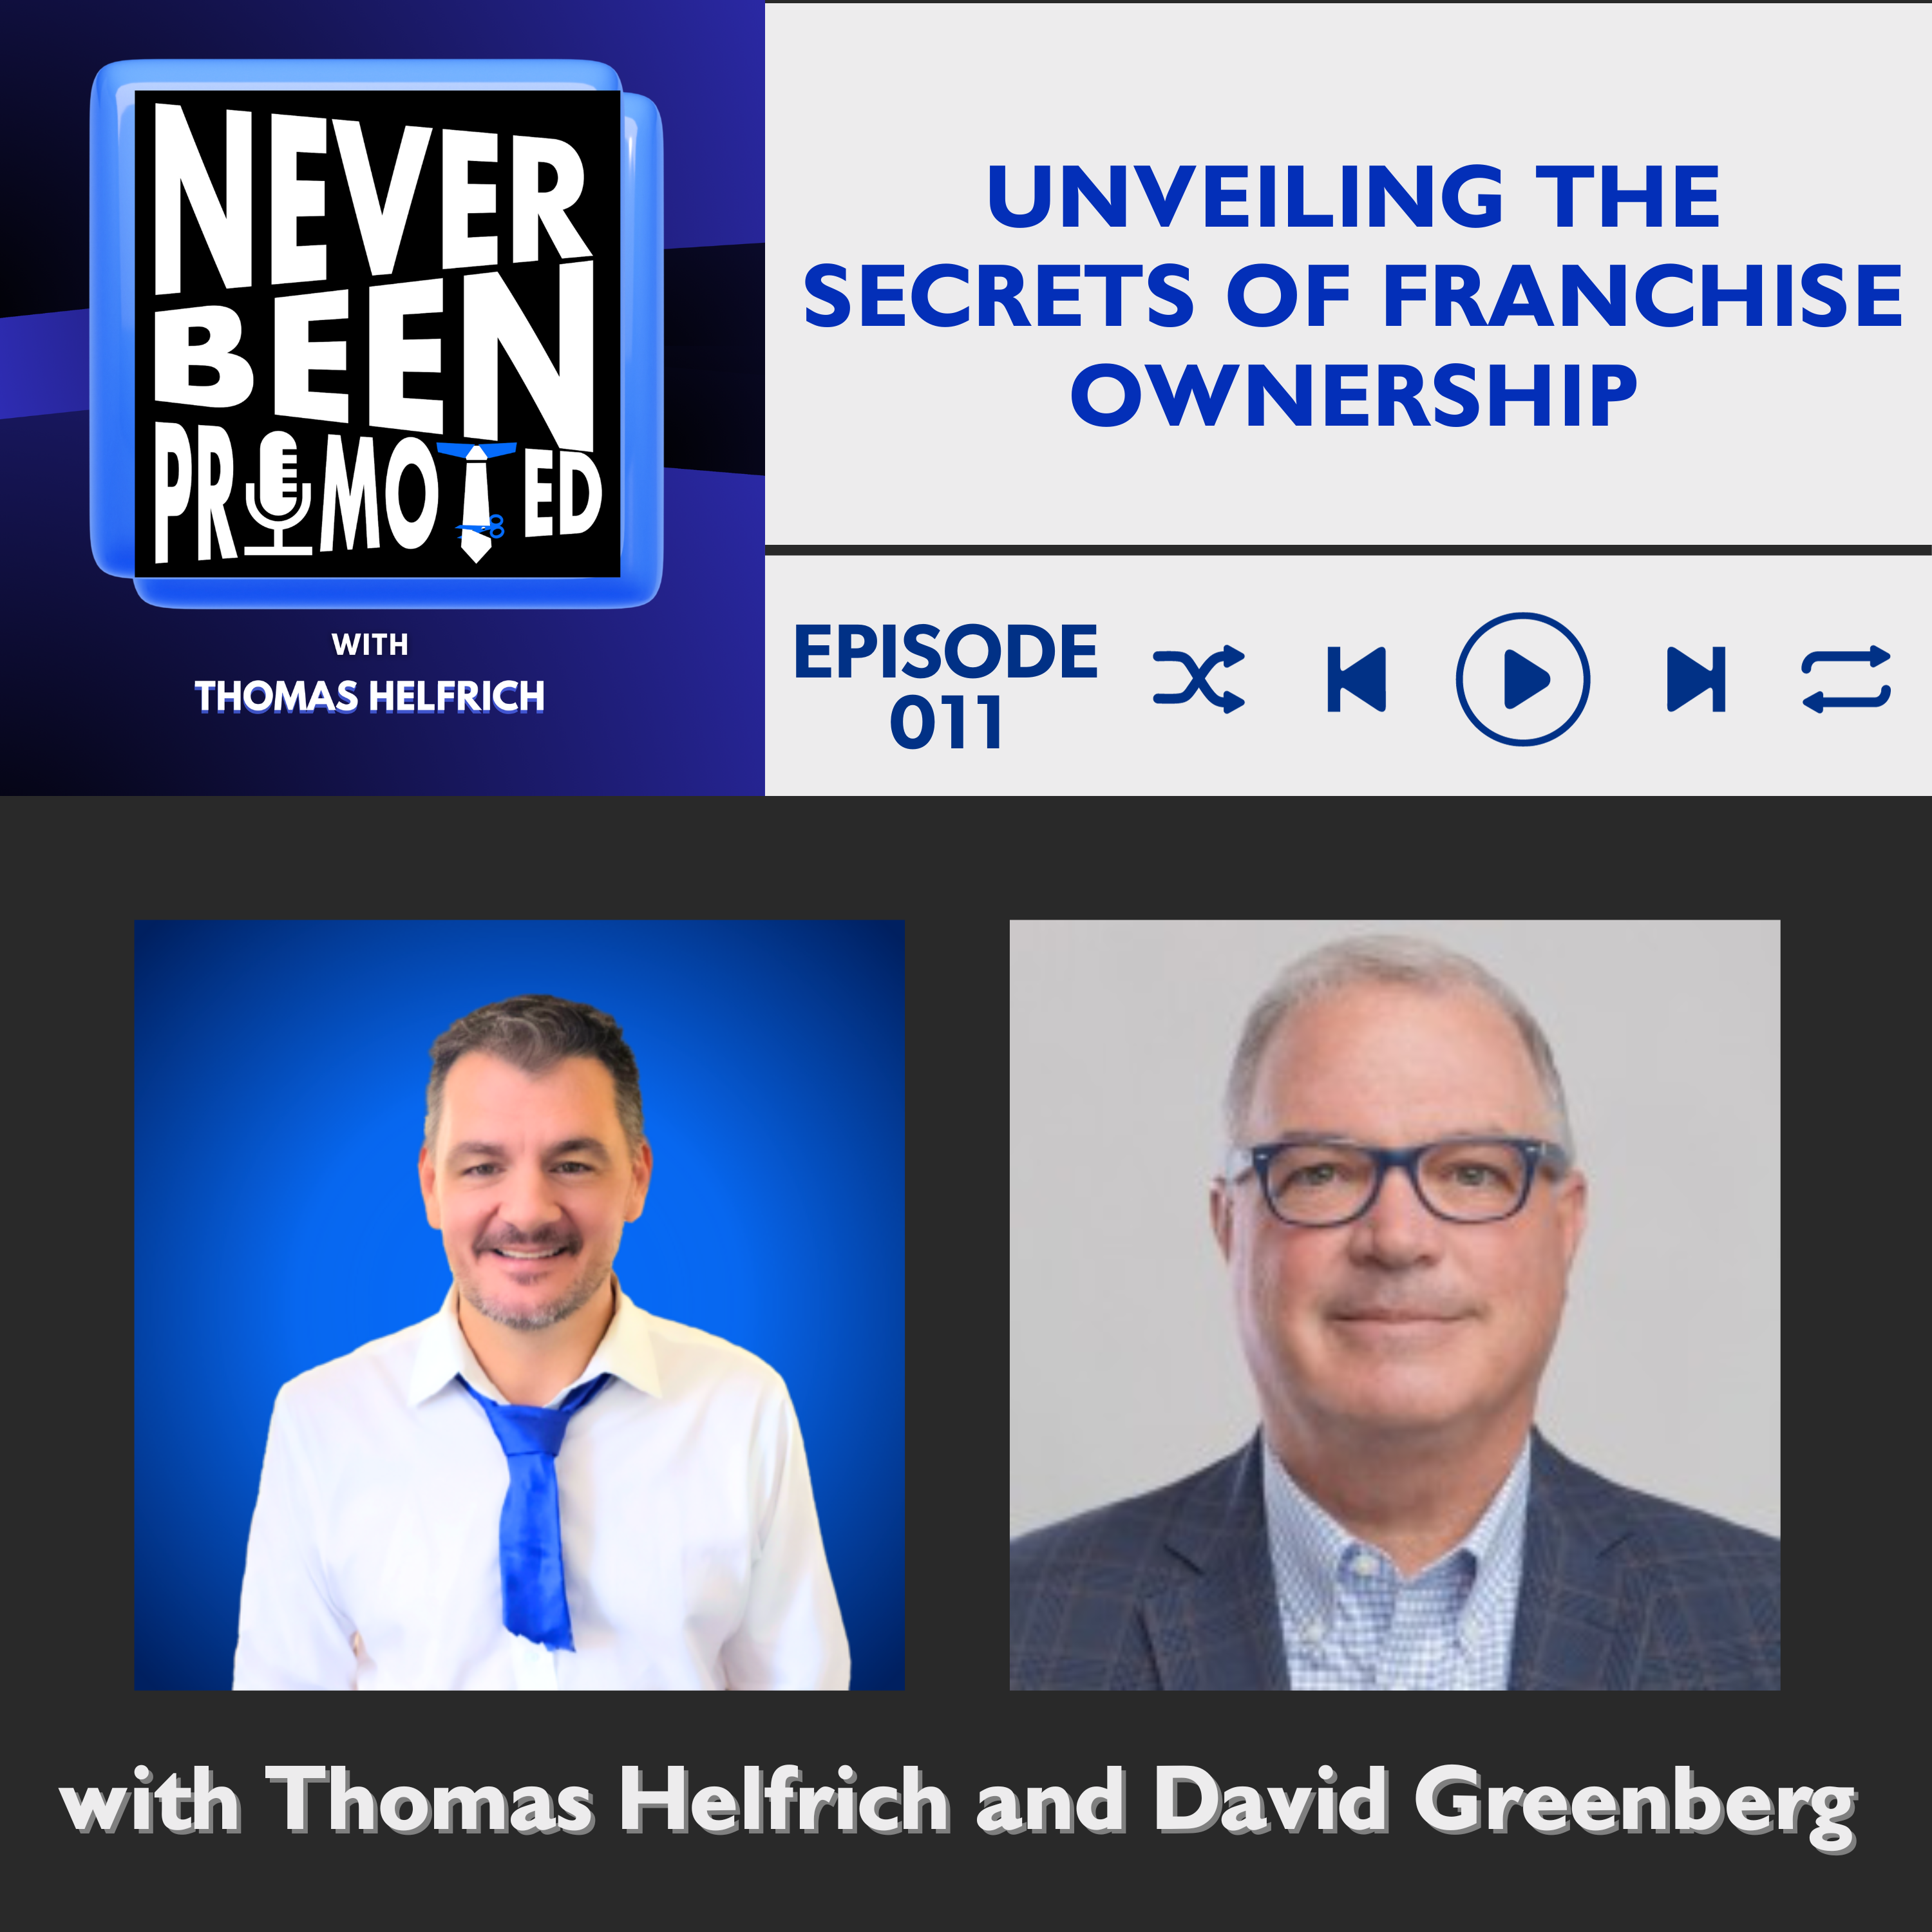 Never Been Promoted podcast: Unveiling the Secrets of Franchise Ownership